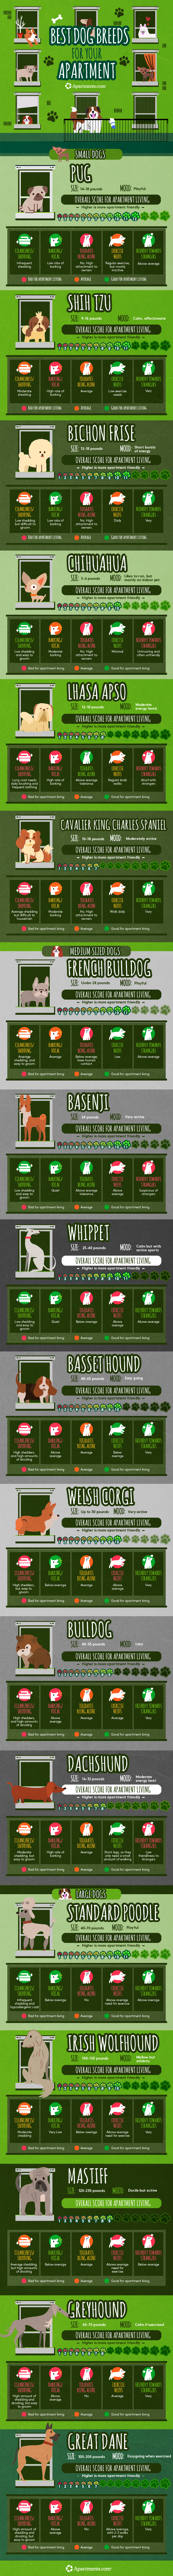 Graphic showing dog breeds and how adaptable they are to apartment living.